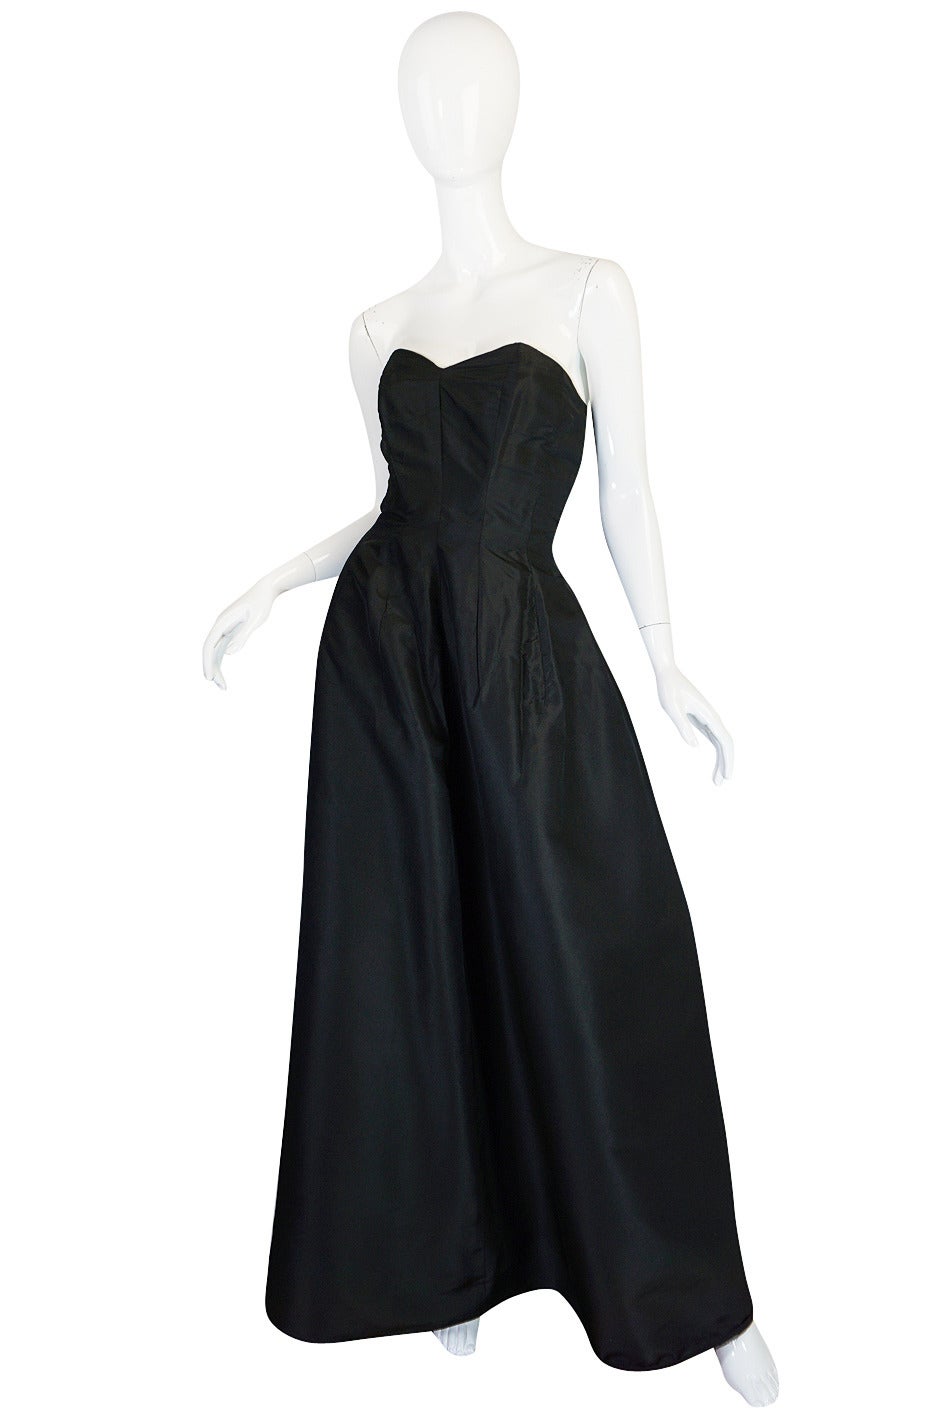 Beautiful 1950s Black Strapless Bonwit Teller Silk Gown For Sale 1